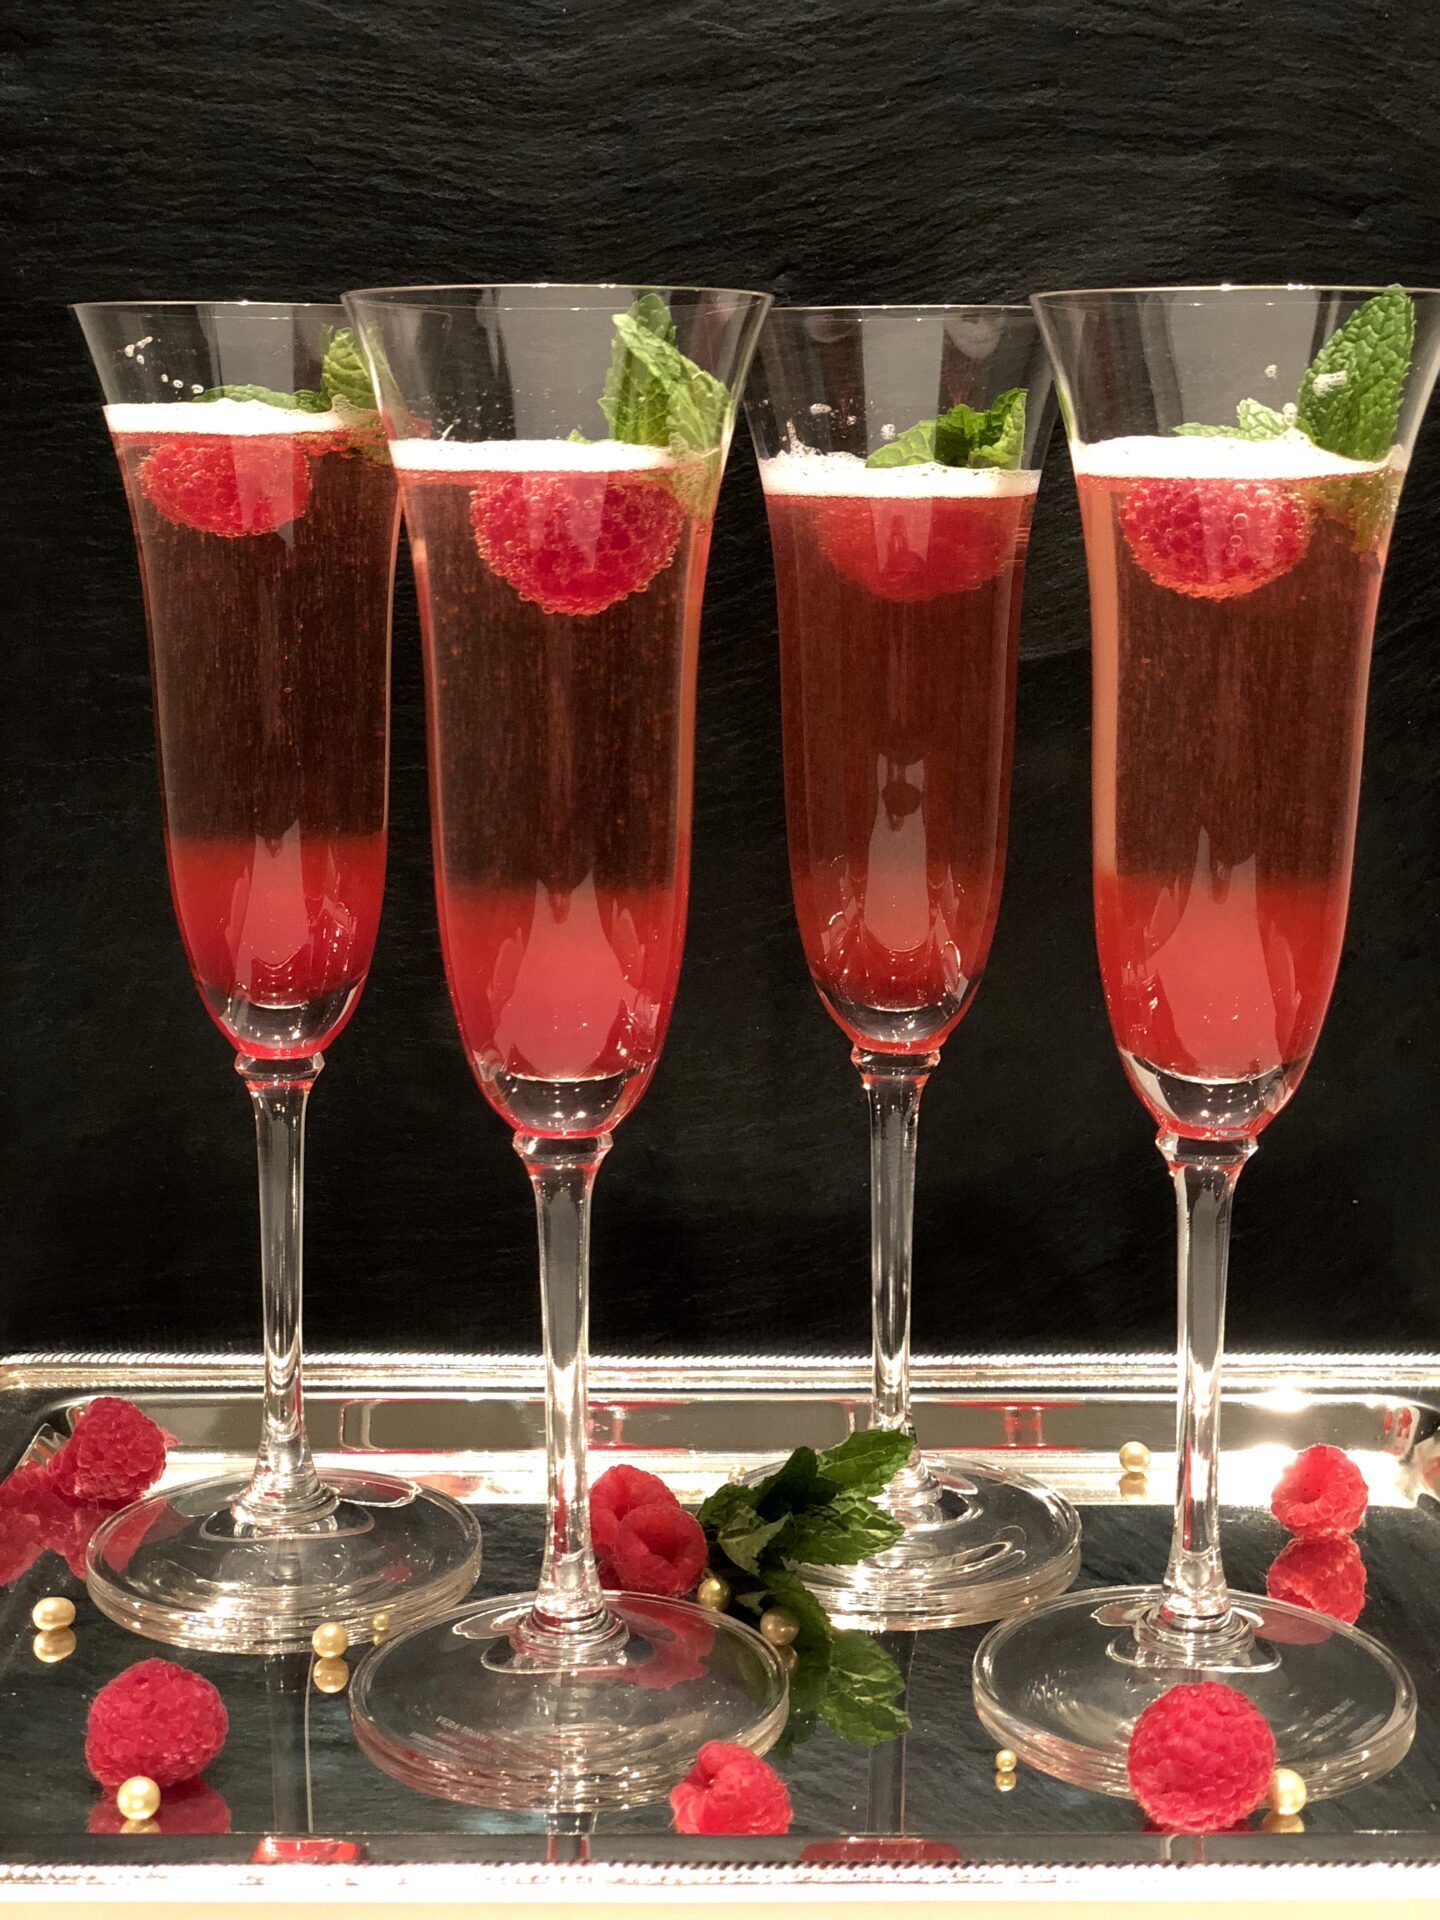 Holiday Kir Royale Cocktails with raspberries on a silver tray